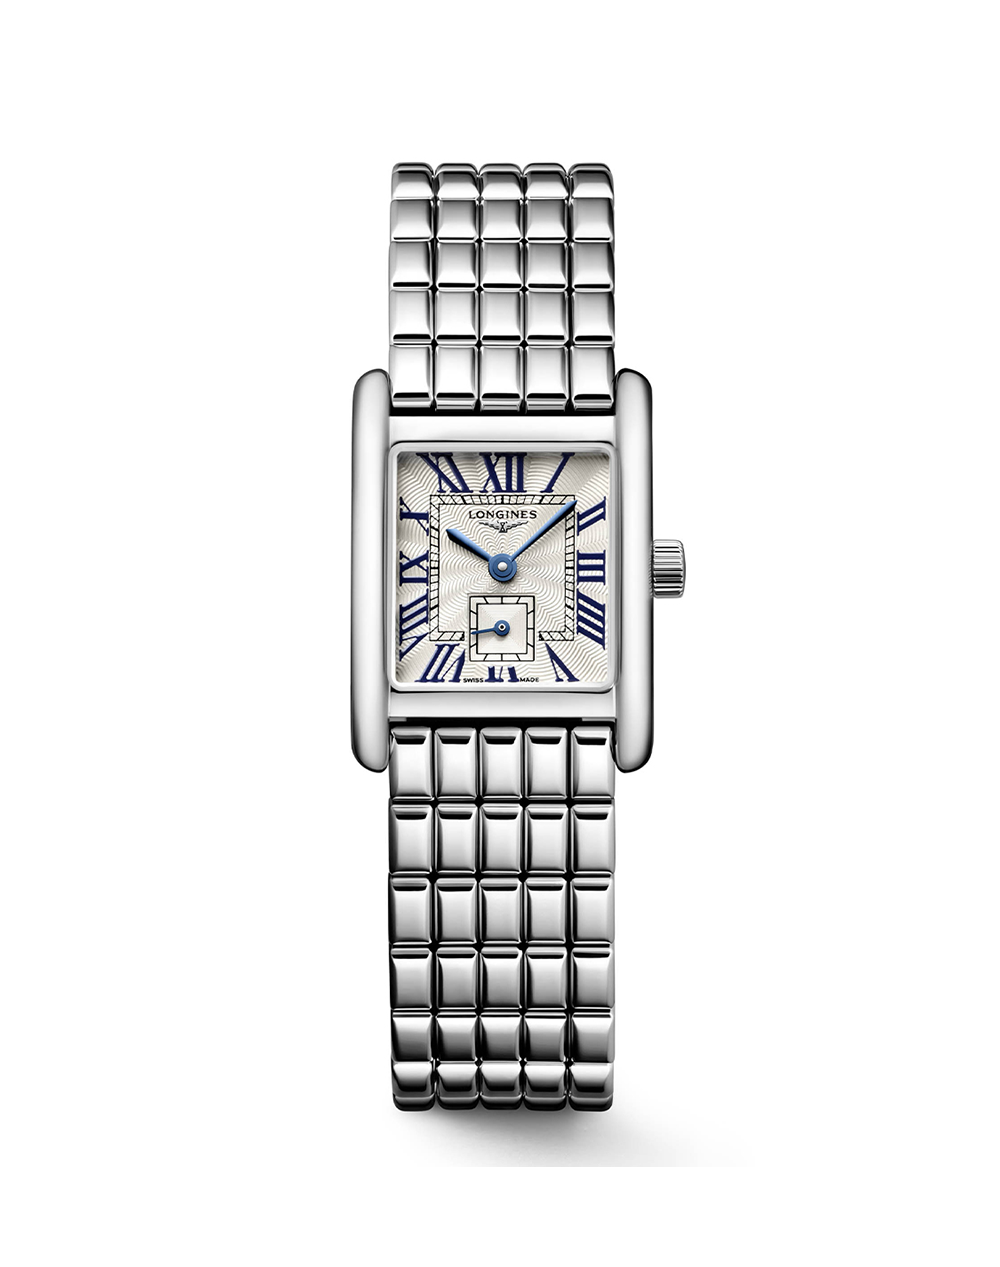 Longines Mini DolceVita 29mm Watch with Blued Steel Hands